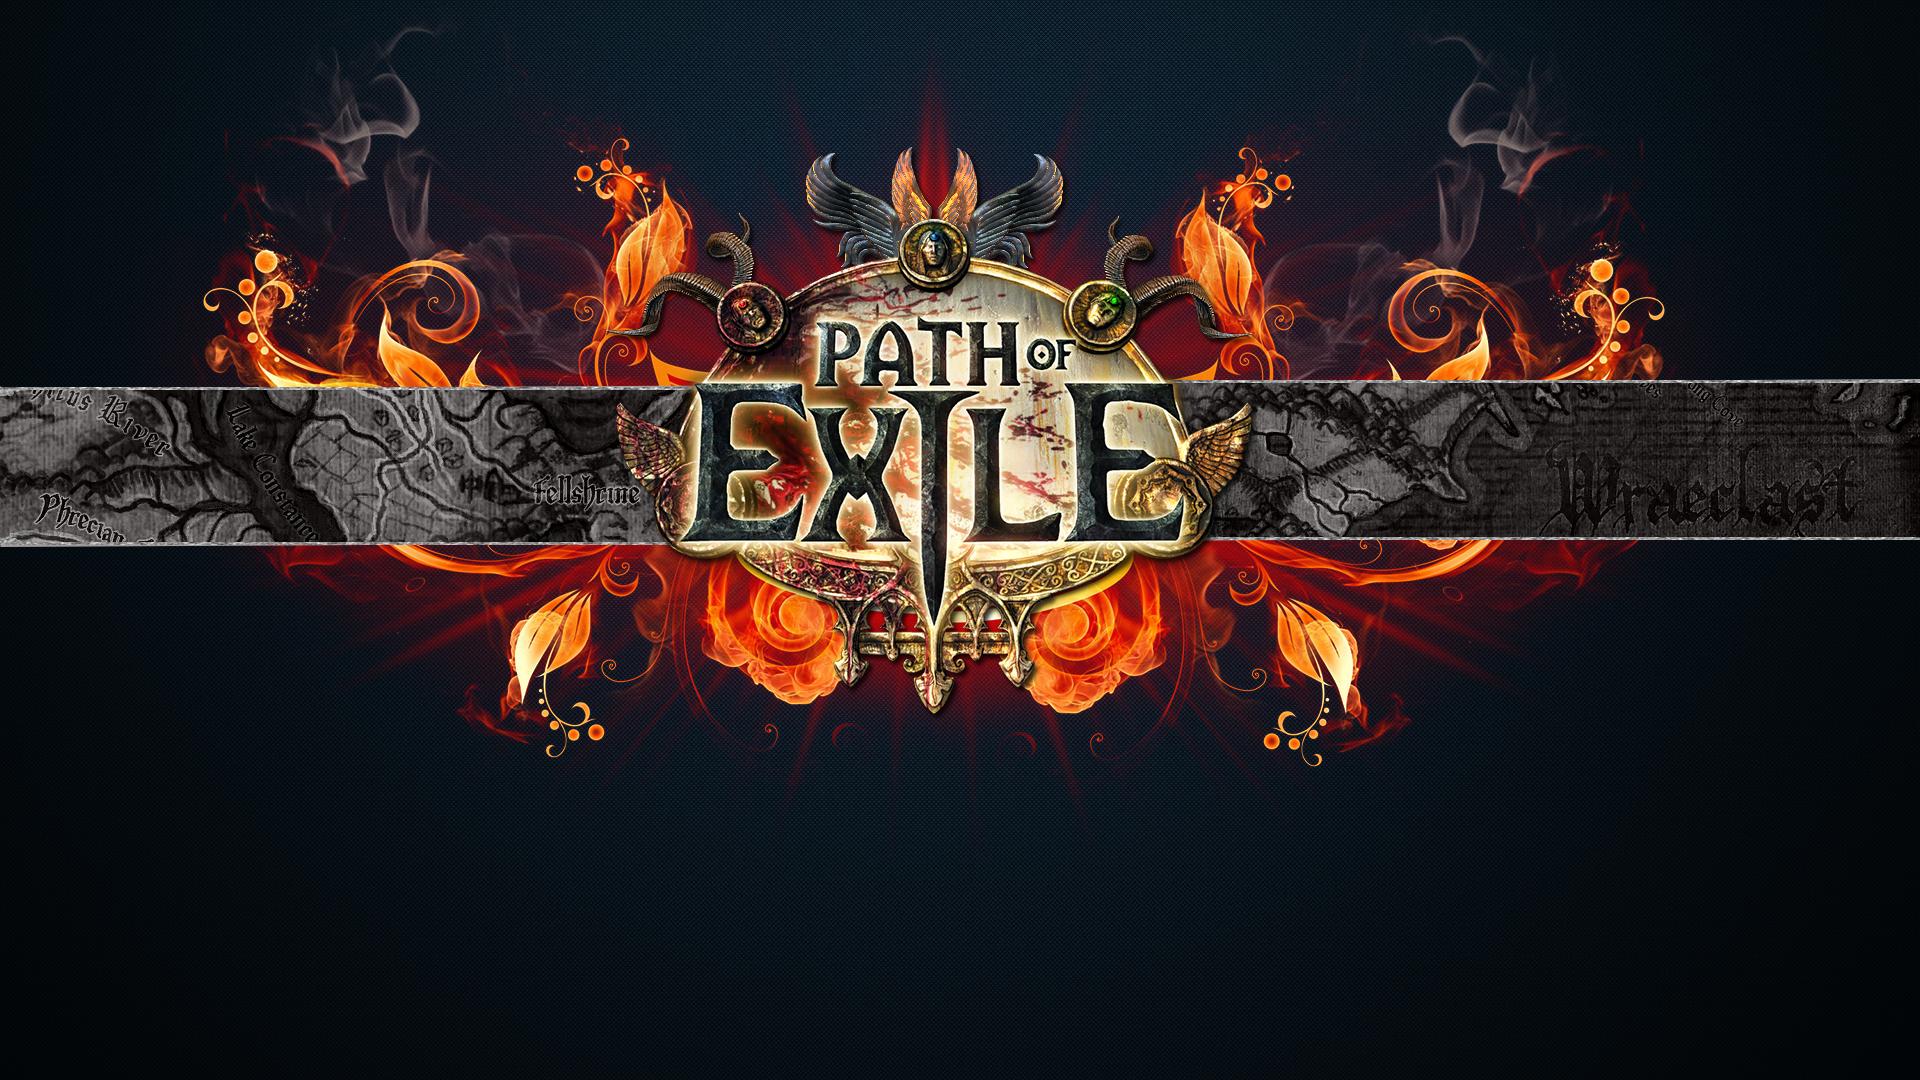 Path of Exile Echoes of the Atlas Wallpapers